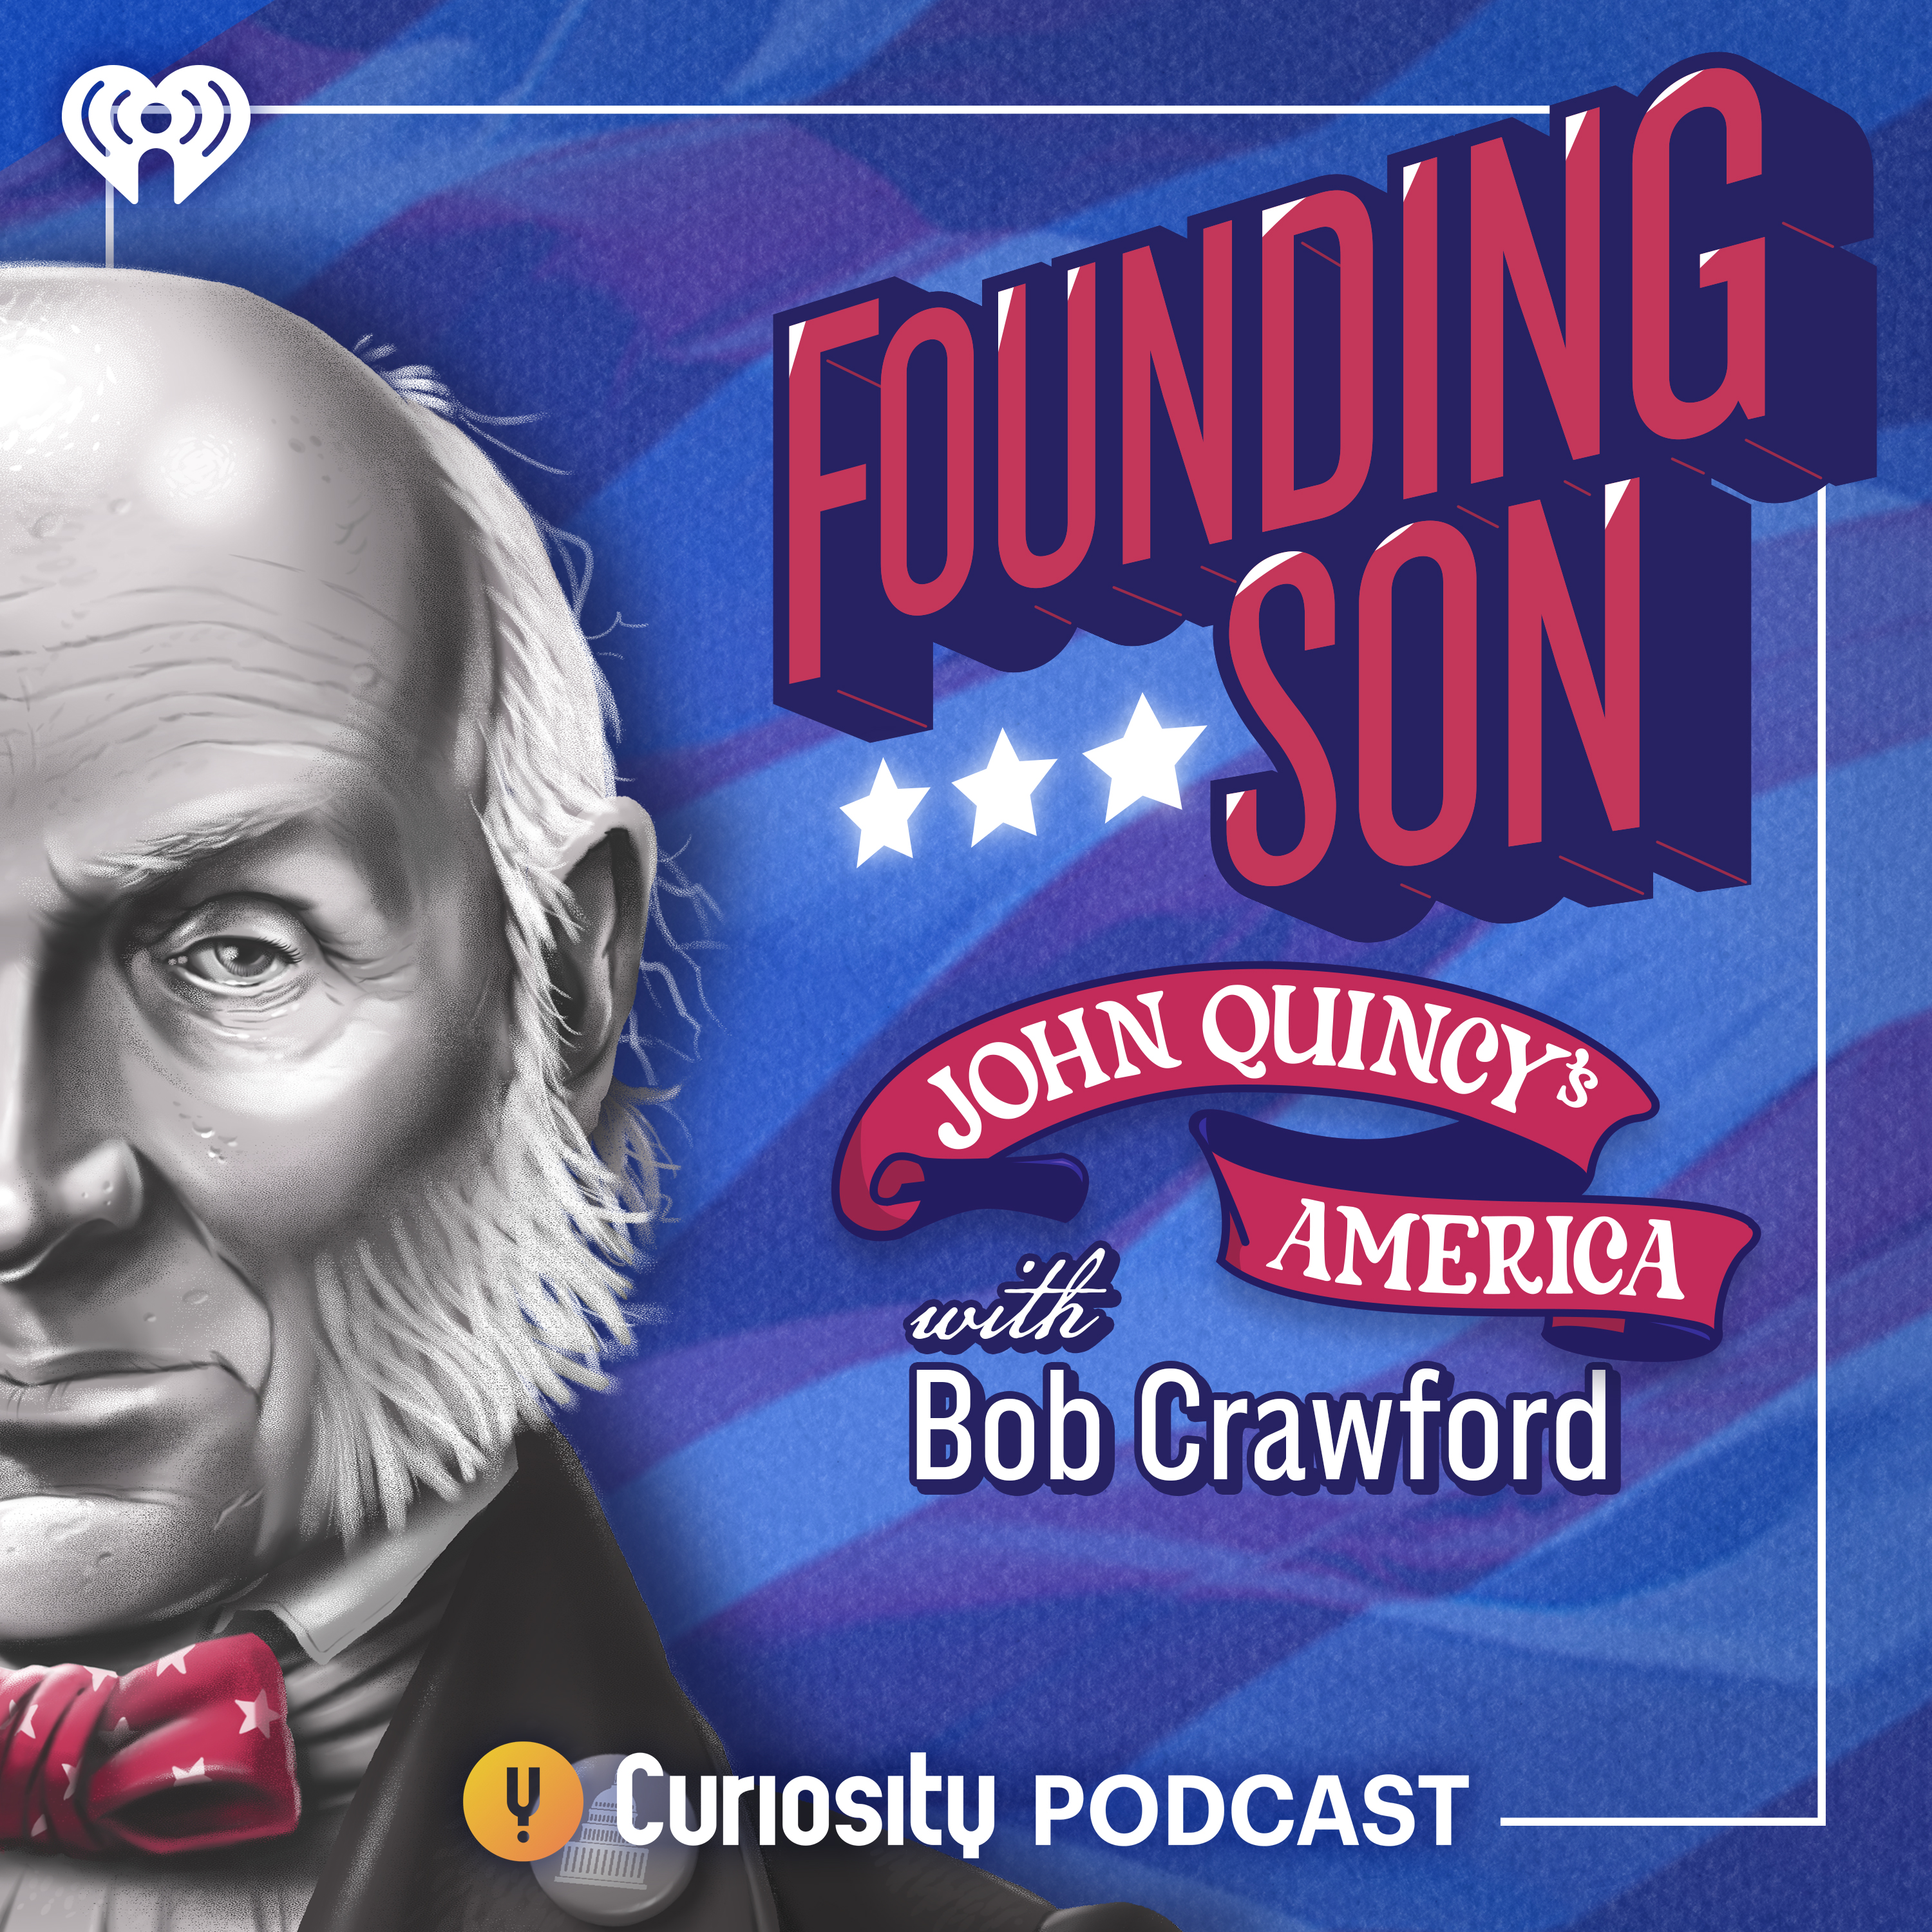 Founding Son: Episode 6 - The Last of Earth